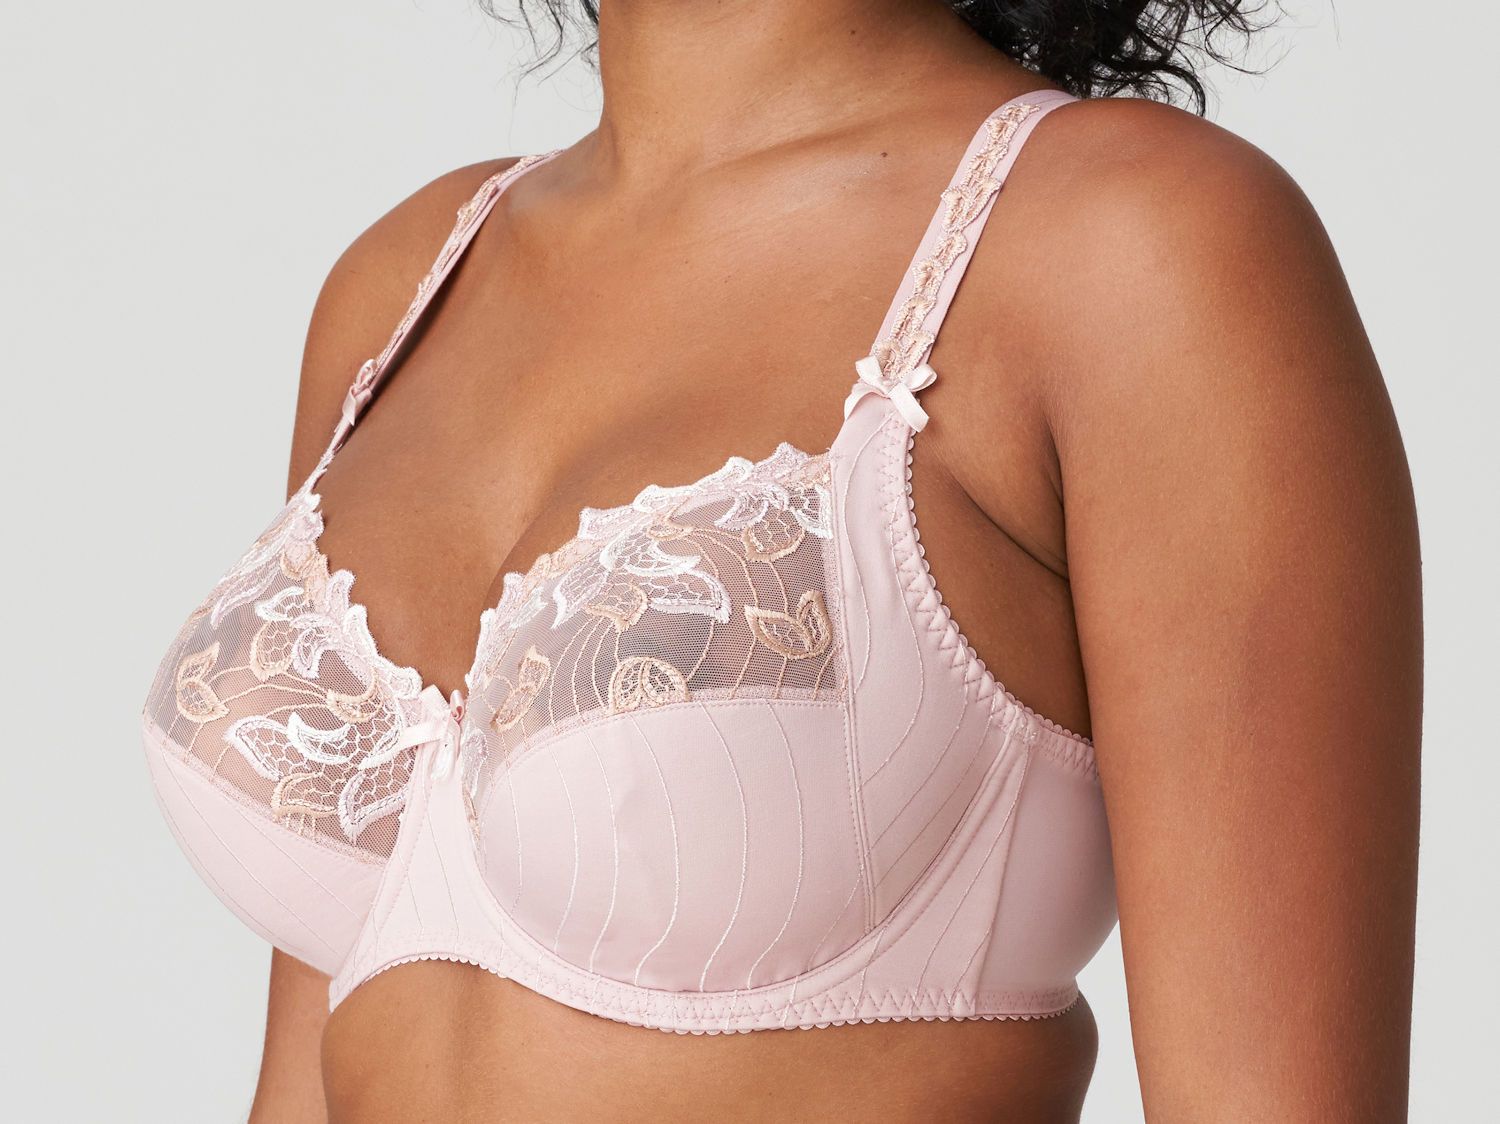 Prima Donna Women's -1815 Deauville I to K Cup Underwire Bra 016, White, 34I  at  Women's Clothing store